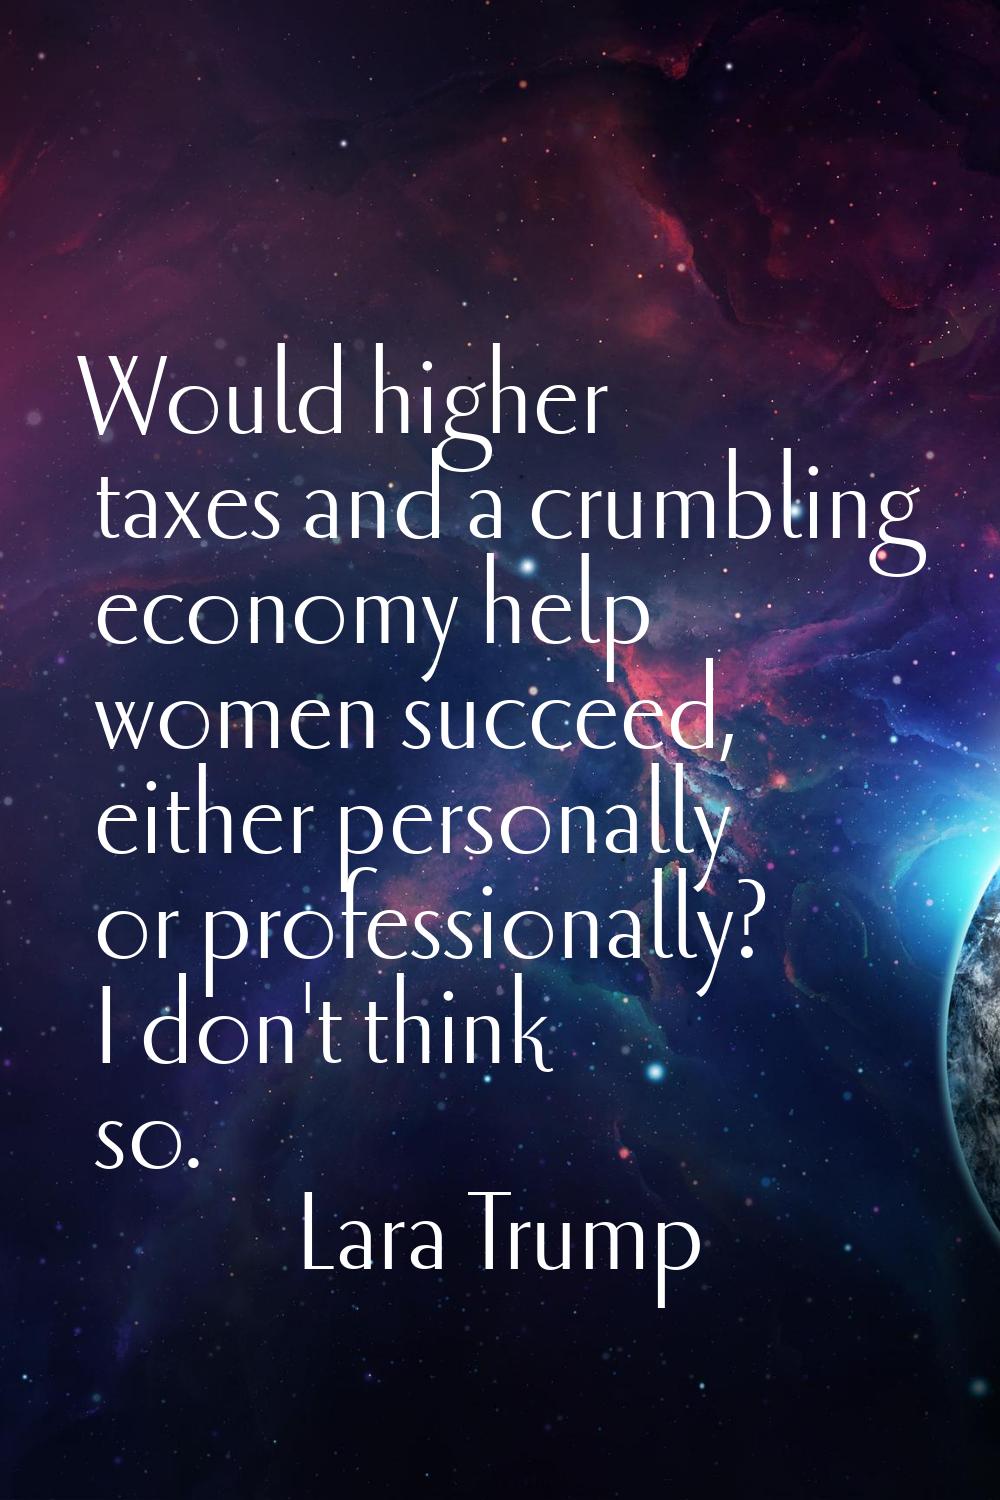 Would higher taxes and a crumbling economy help women succeed, either personally or professionally?